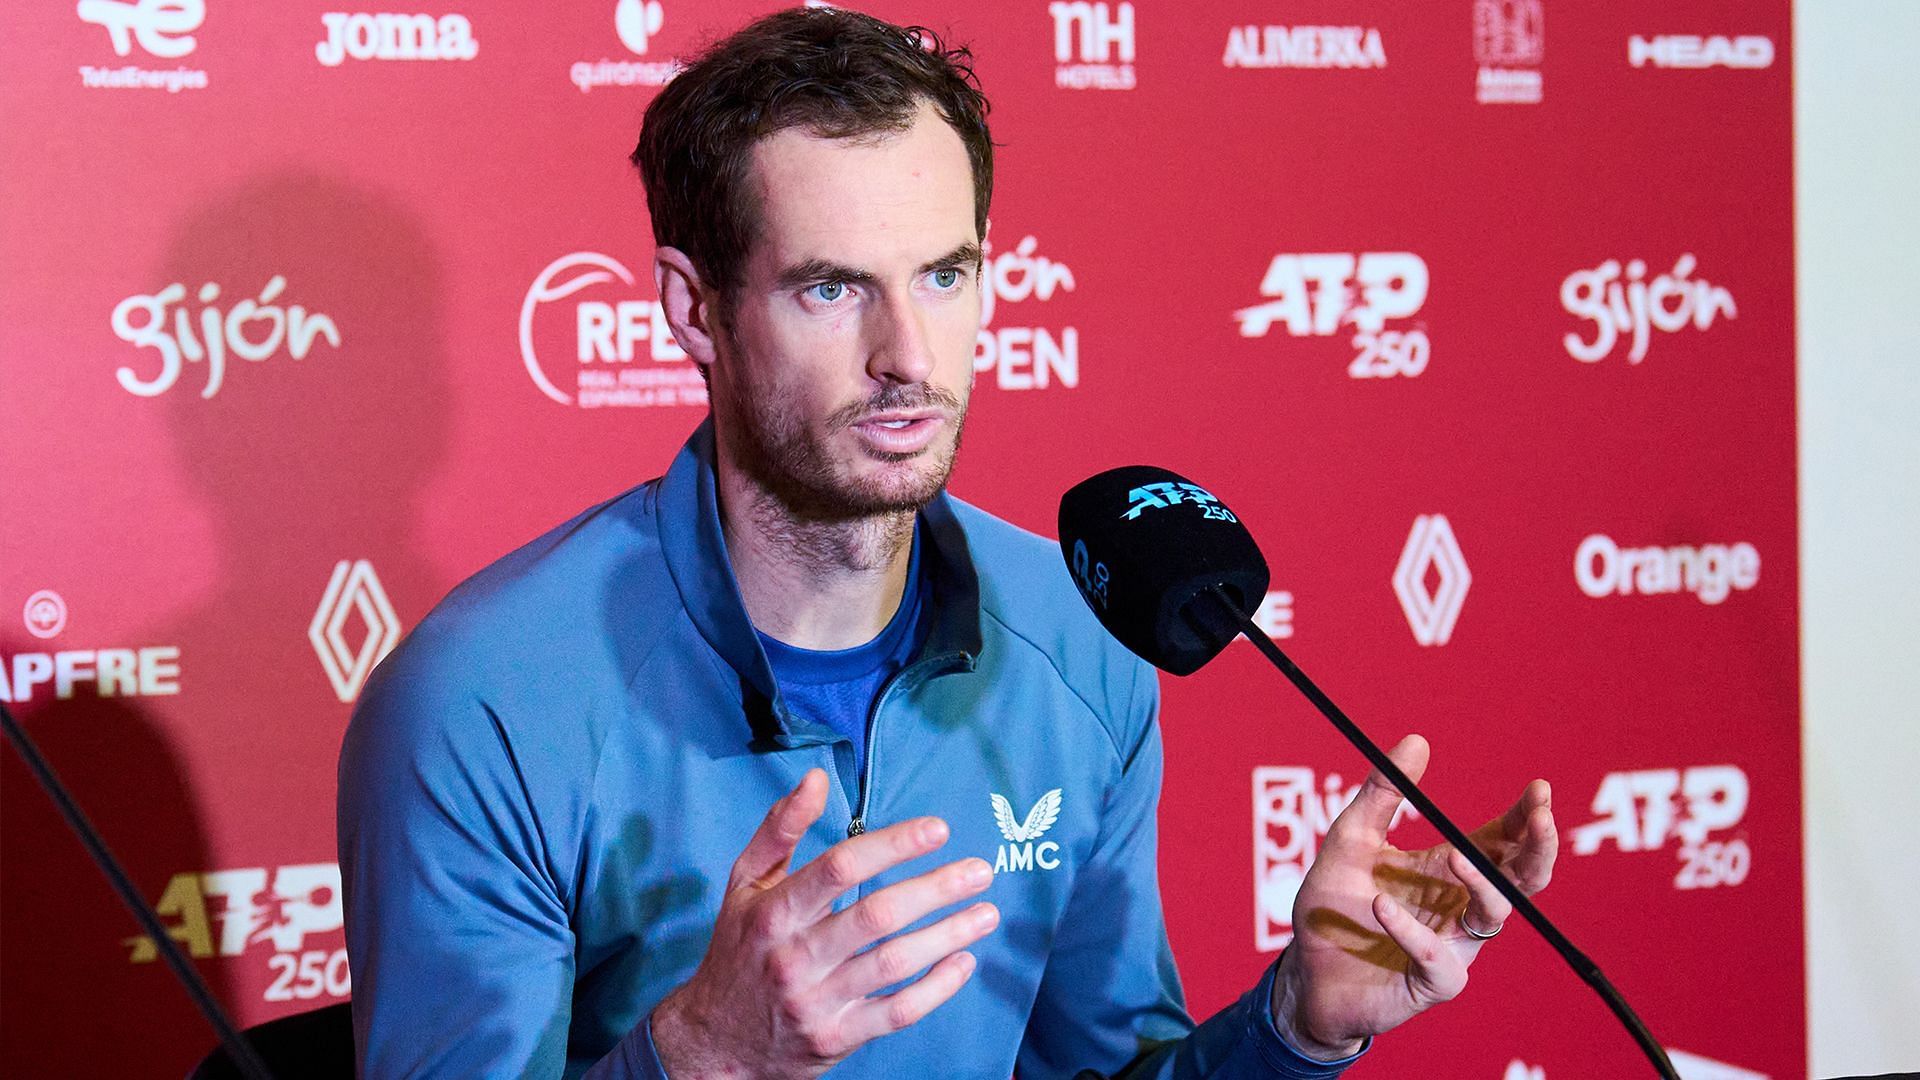 Andy Murray raises concern over the choice of host for the FIFA World Cup